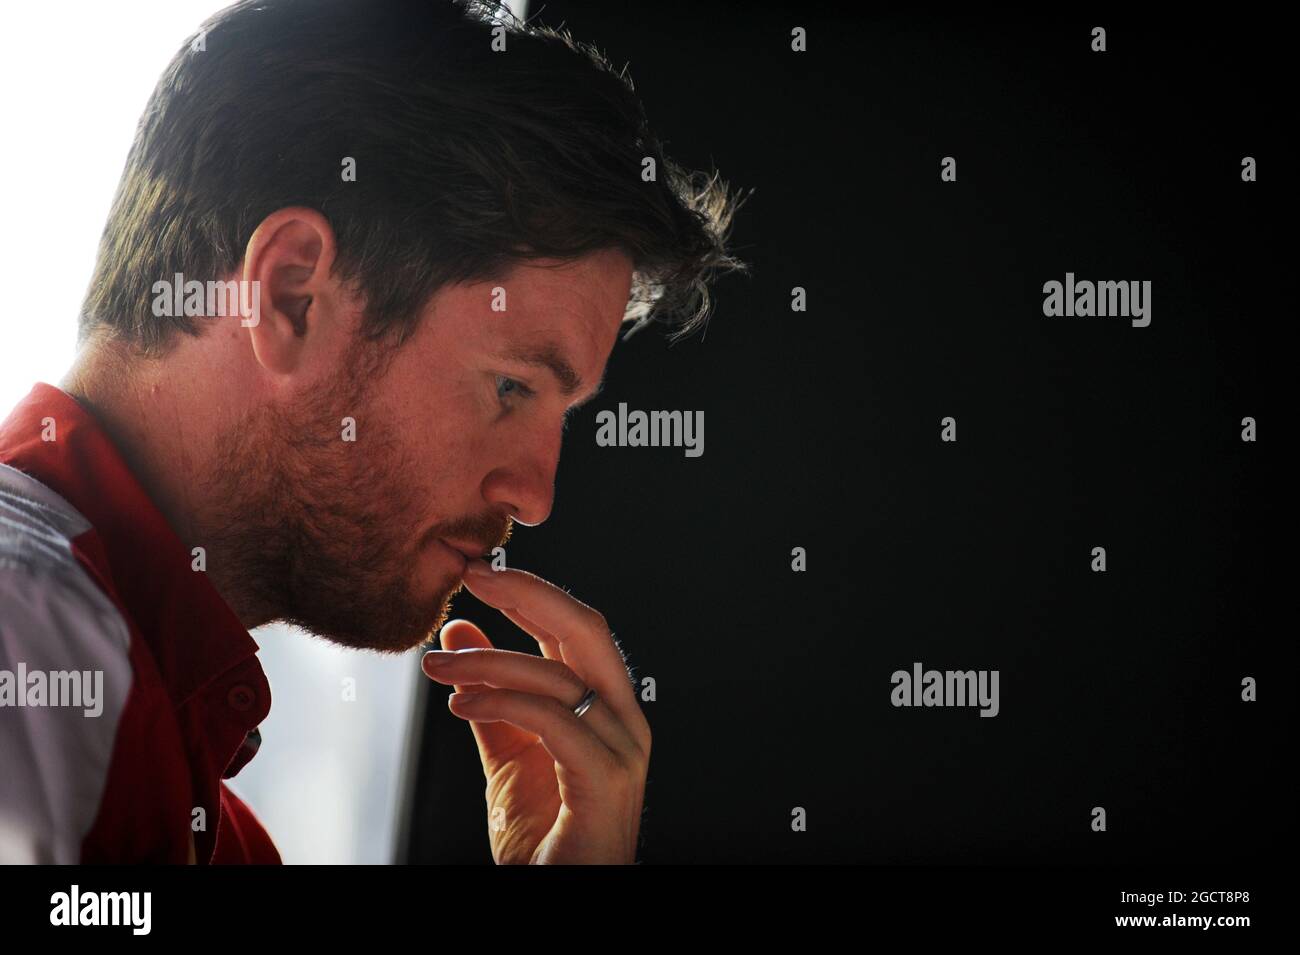 Rob smedley ferrari hi-res stock photography and images - Alamy